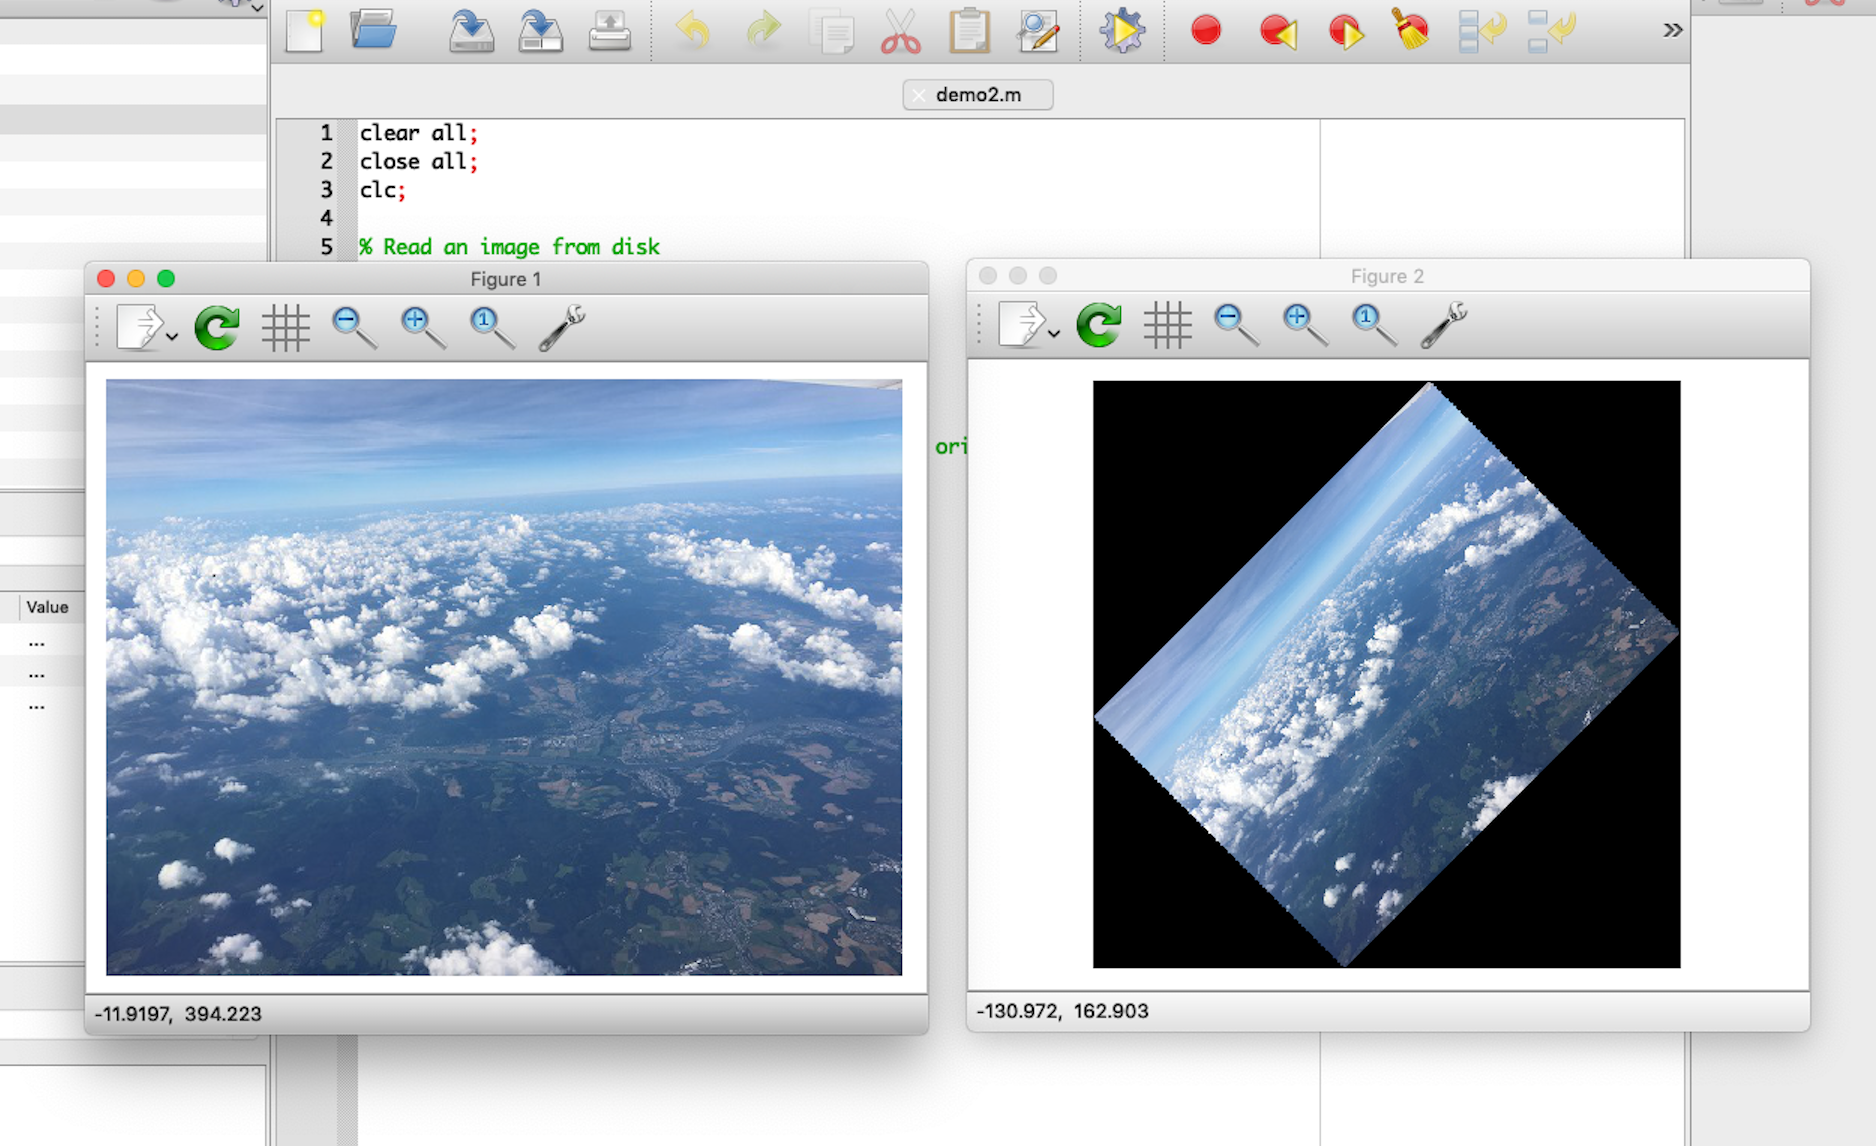 macOS Octave 4.4.1 image processing